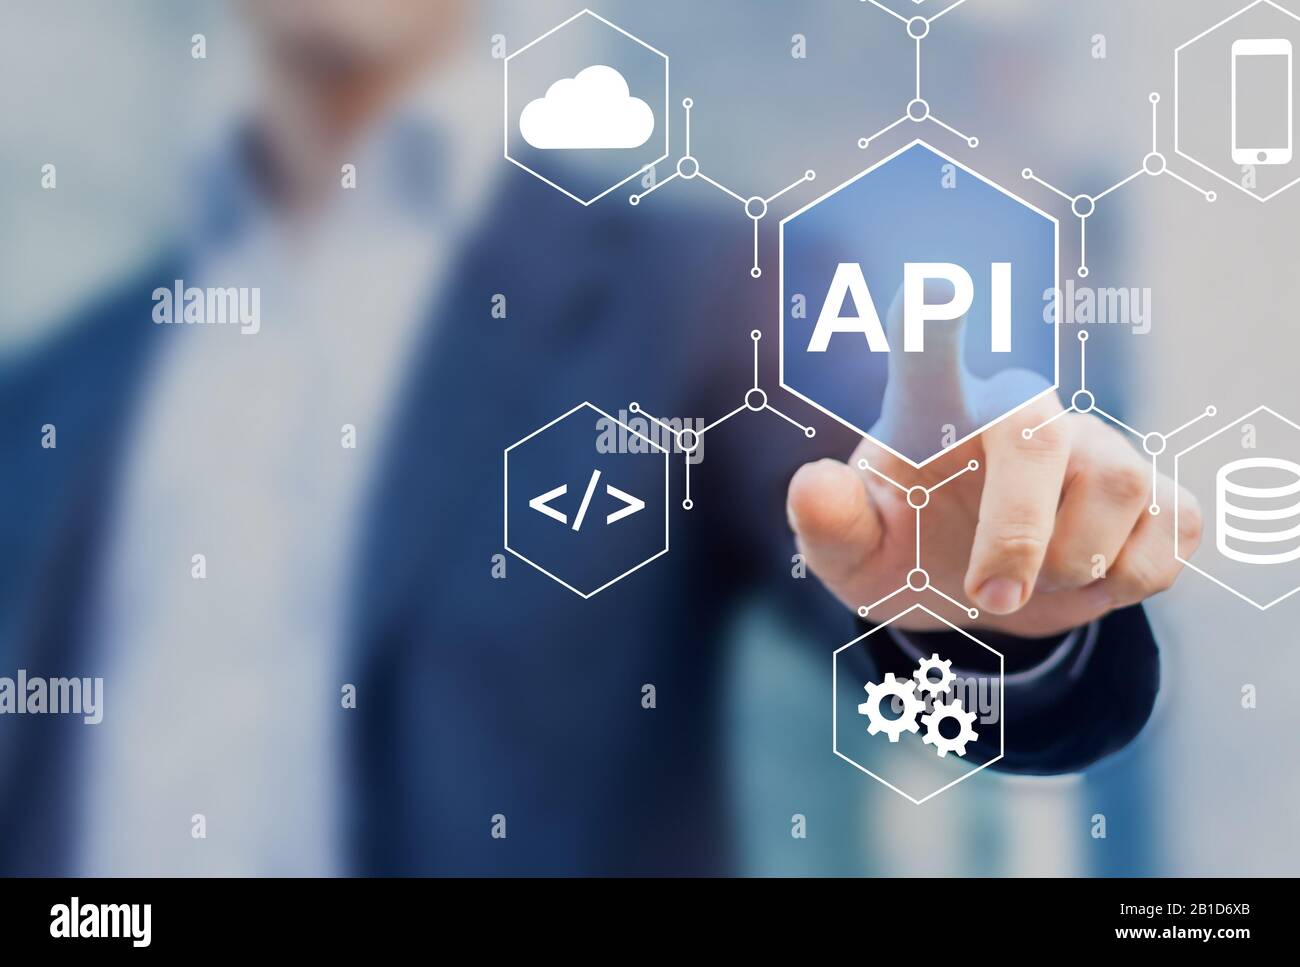 API Application Programming Interface connect services on internet and allow network data communication, software engineer touching concept for IoT, c Stock Photo